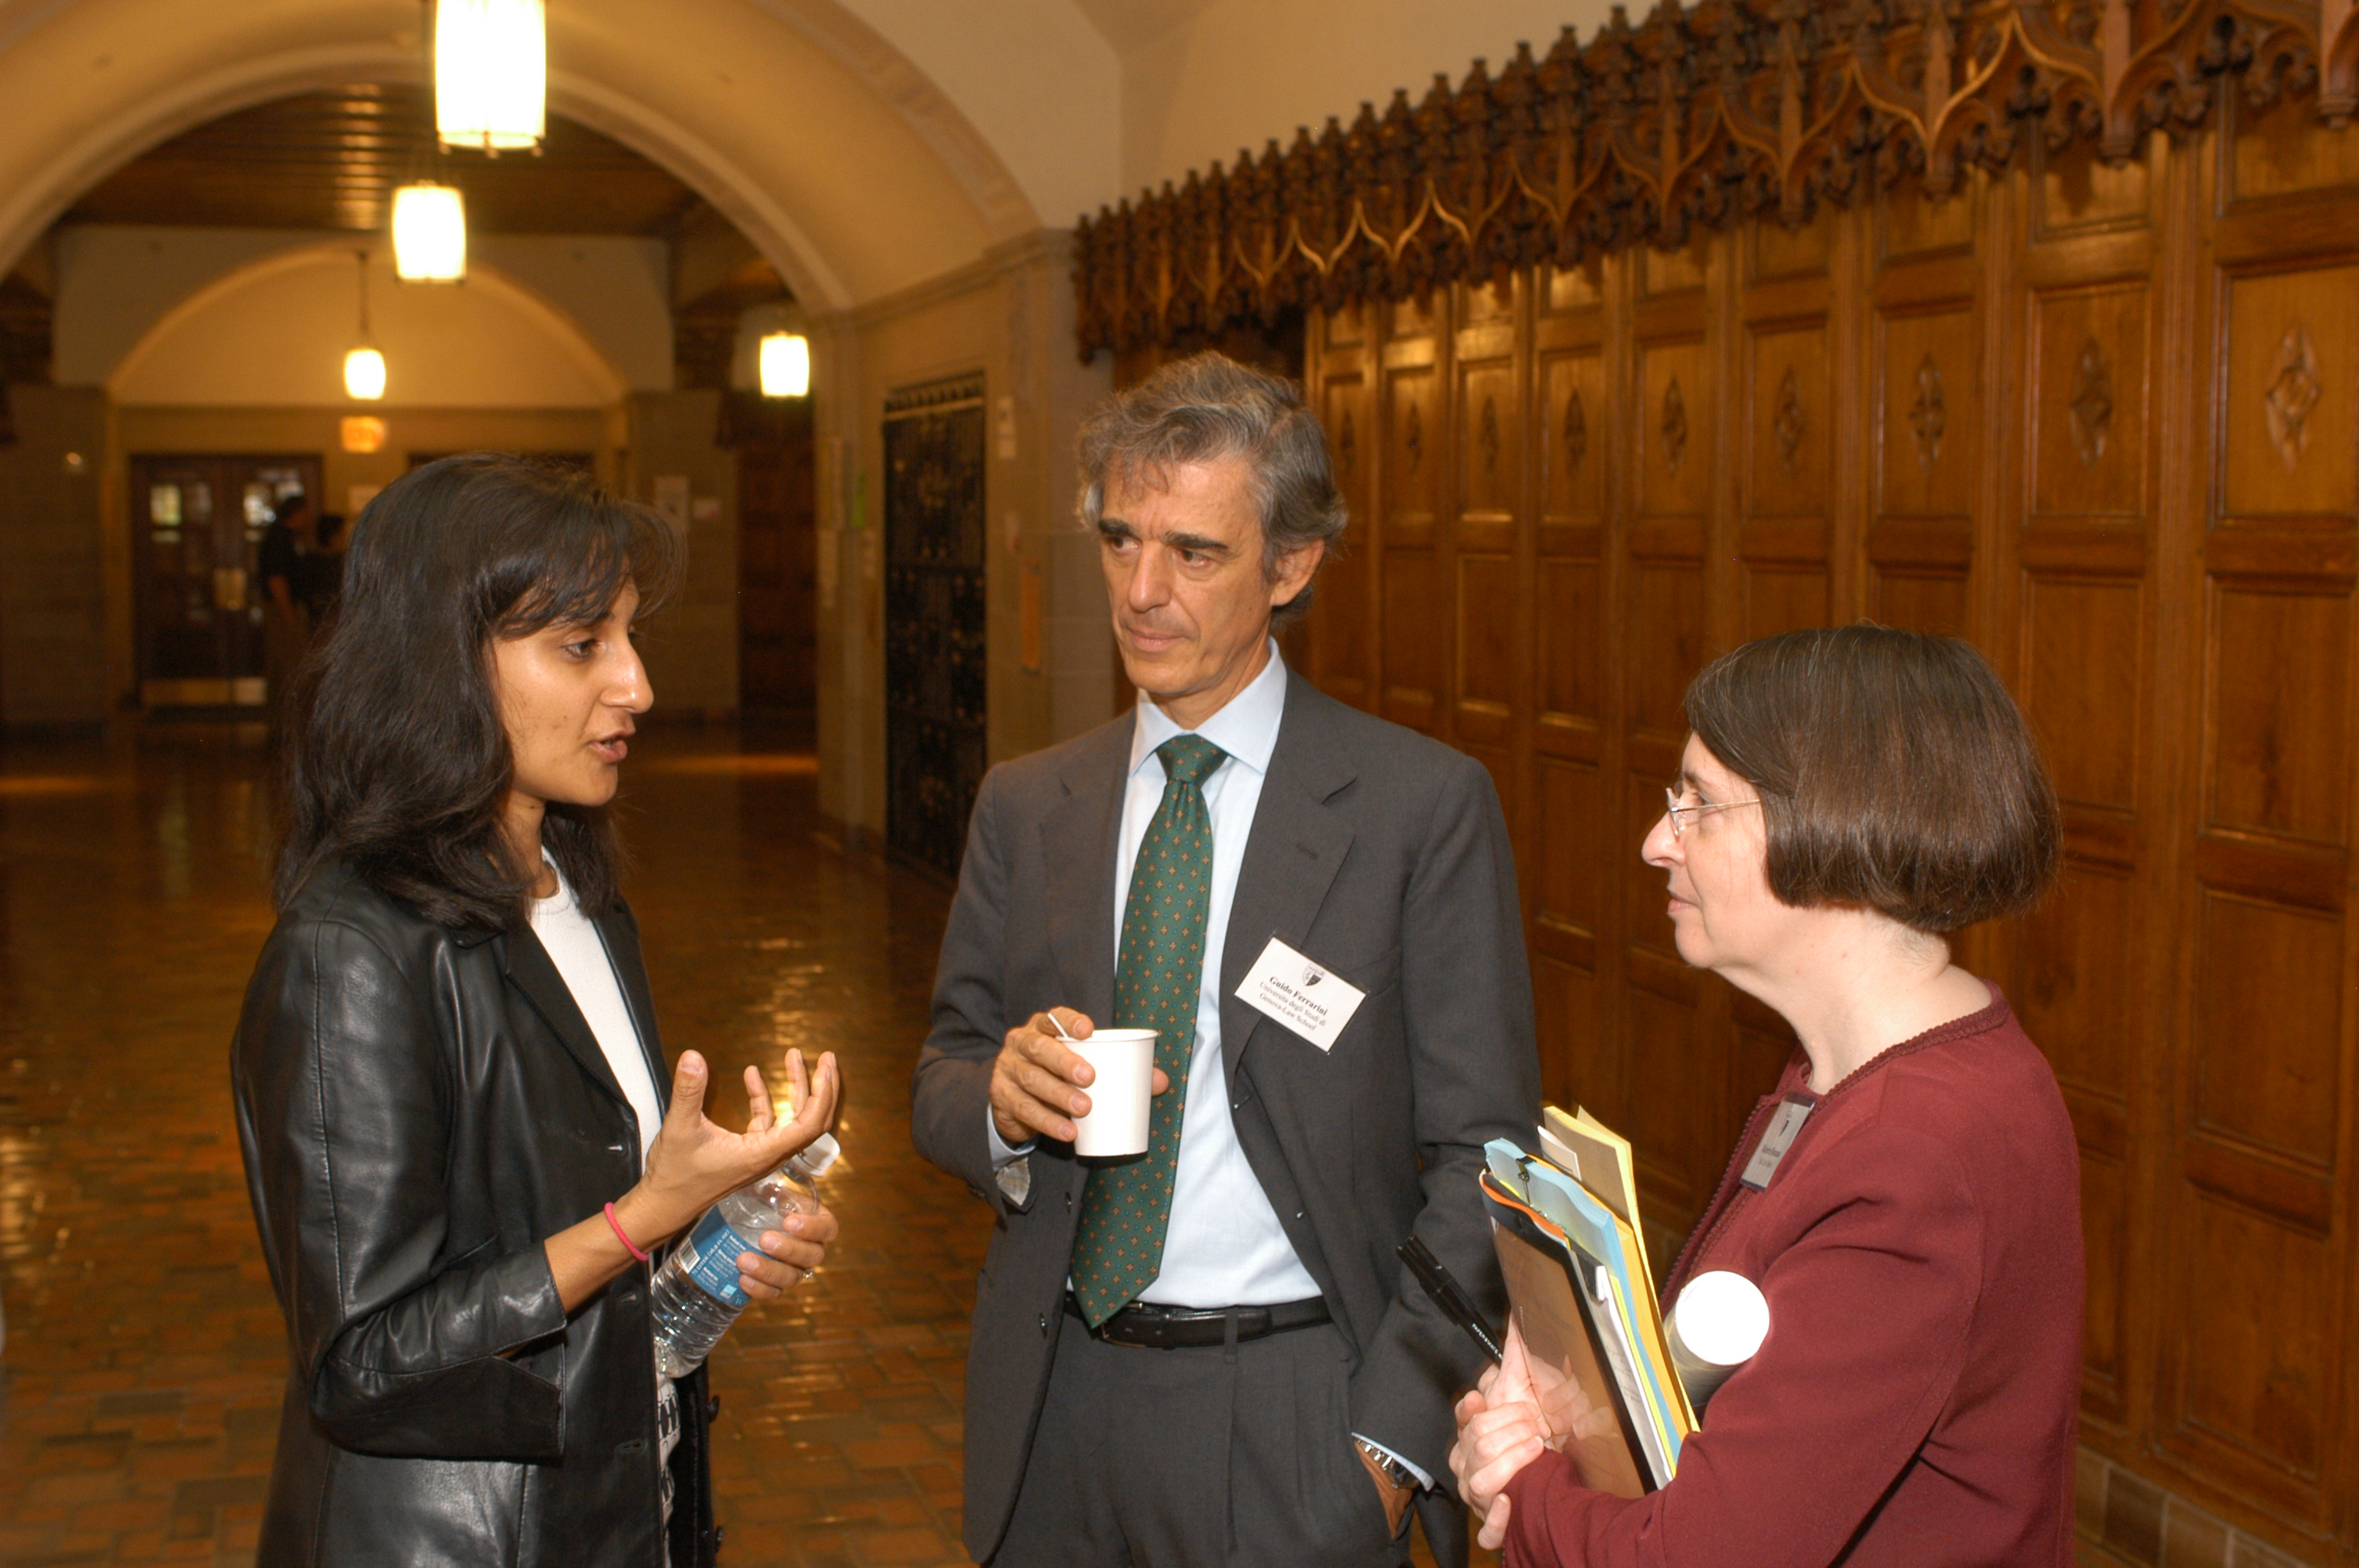 Queen&#039;s Law Prof. and YLS Visiting Prof. Anita Anand, U. of Genoa Business Law Prof. Guido Ferrarini LLM &#039;78, and YLS Prof. and Center Director Roberta Romano &#039;80